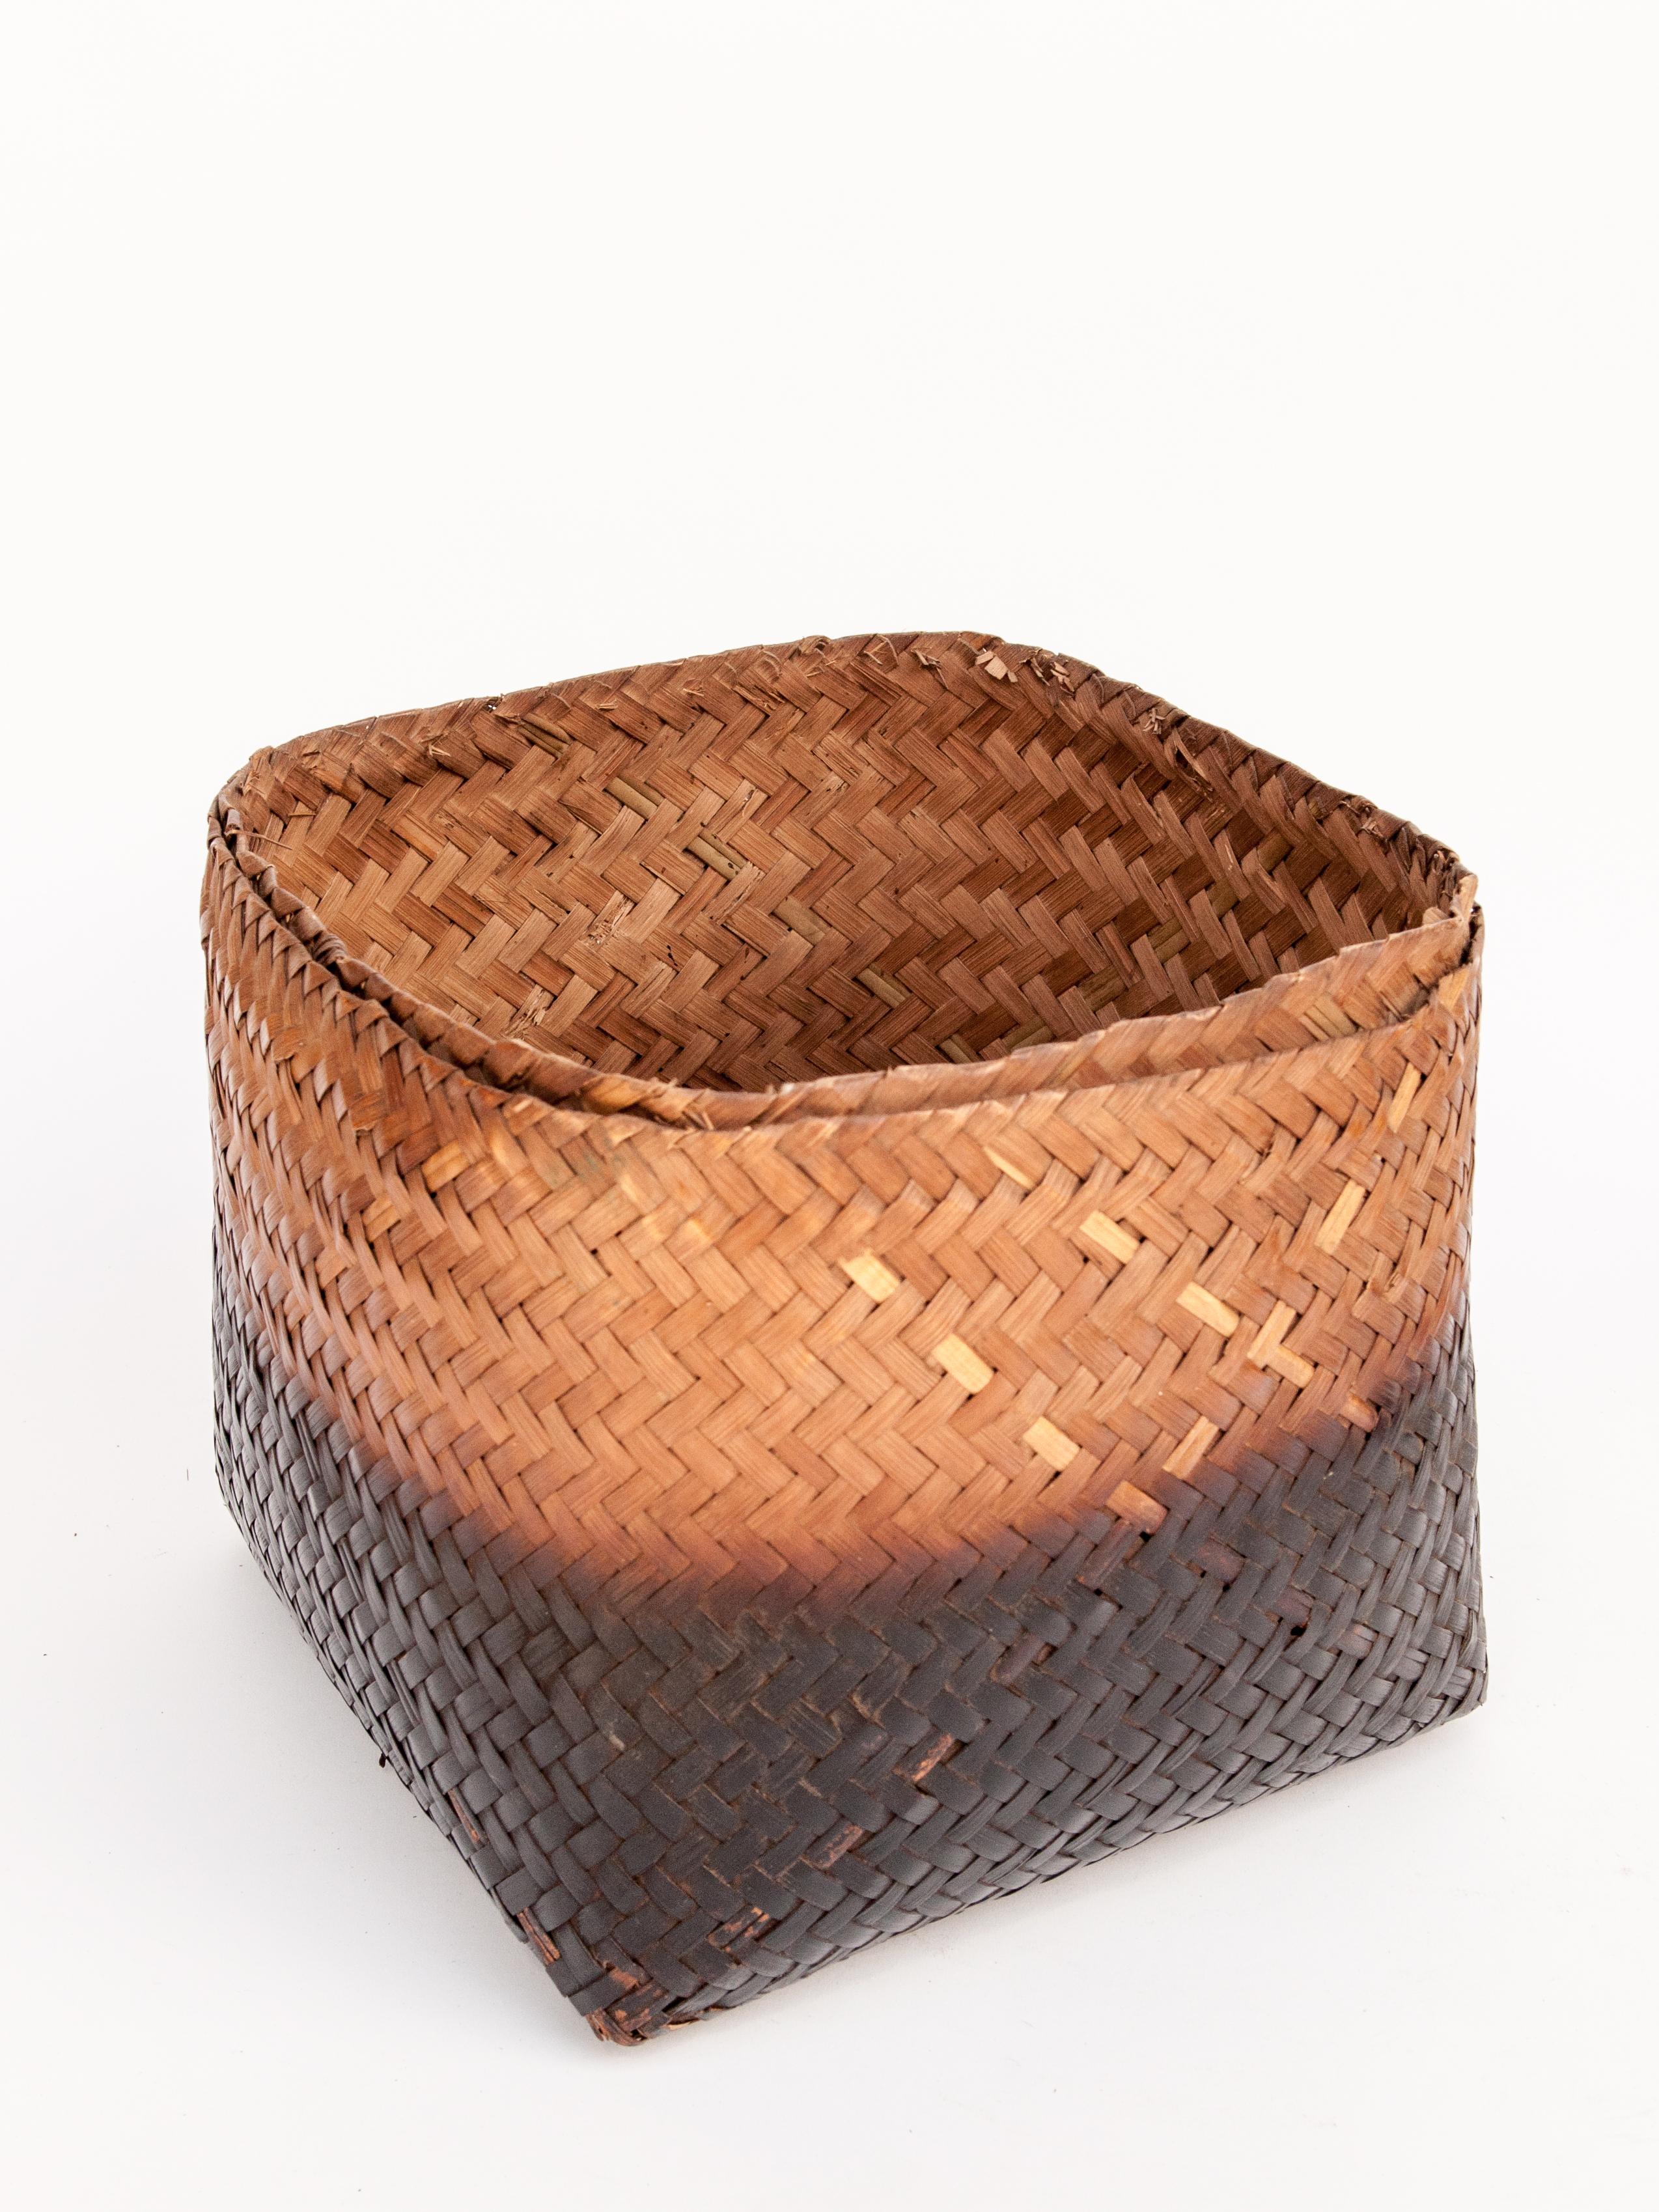 Vintage Bamboo Storage Basket with Lid Lombok, Indonesia, Mid-Late 20th Century 10